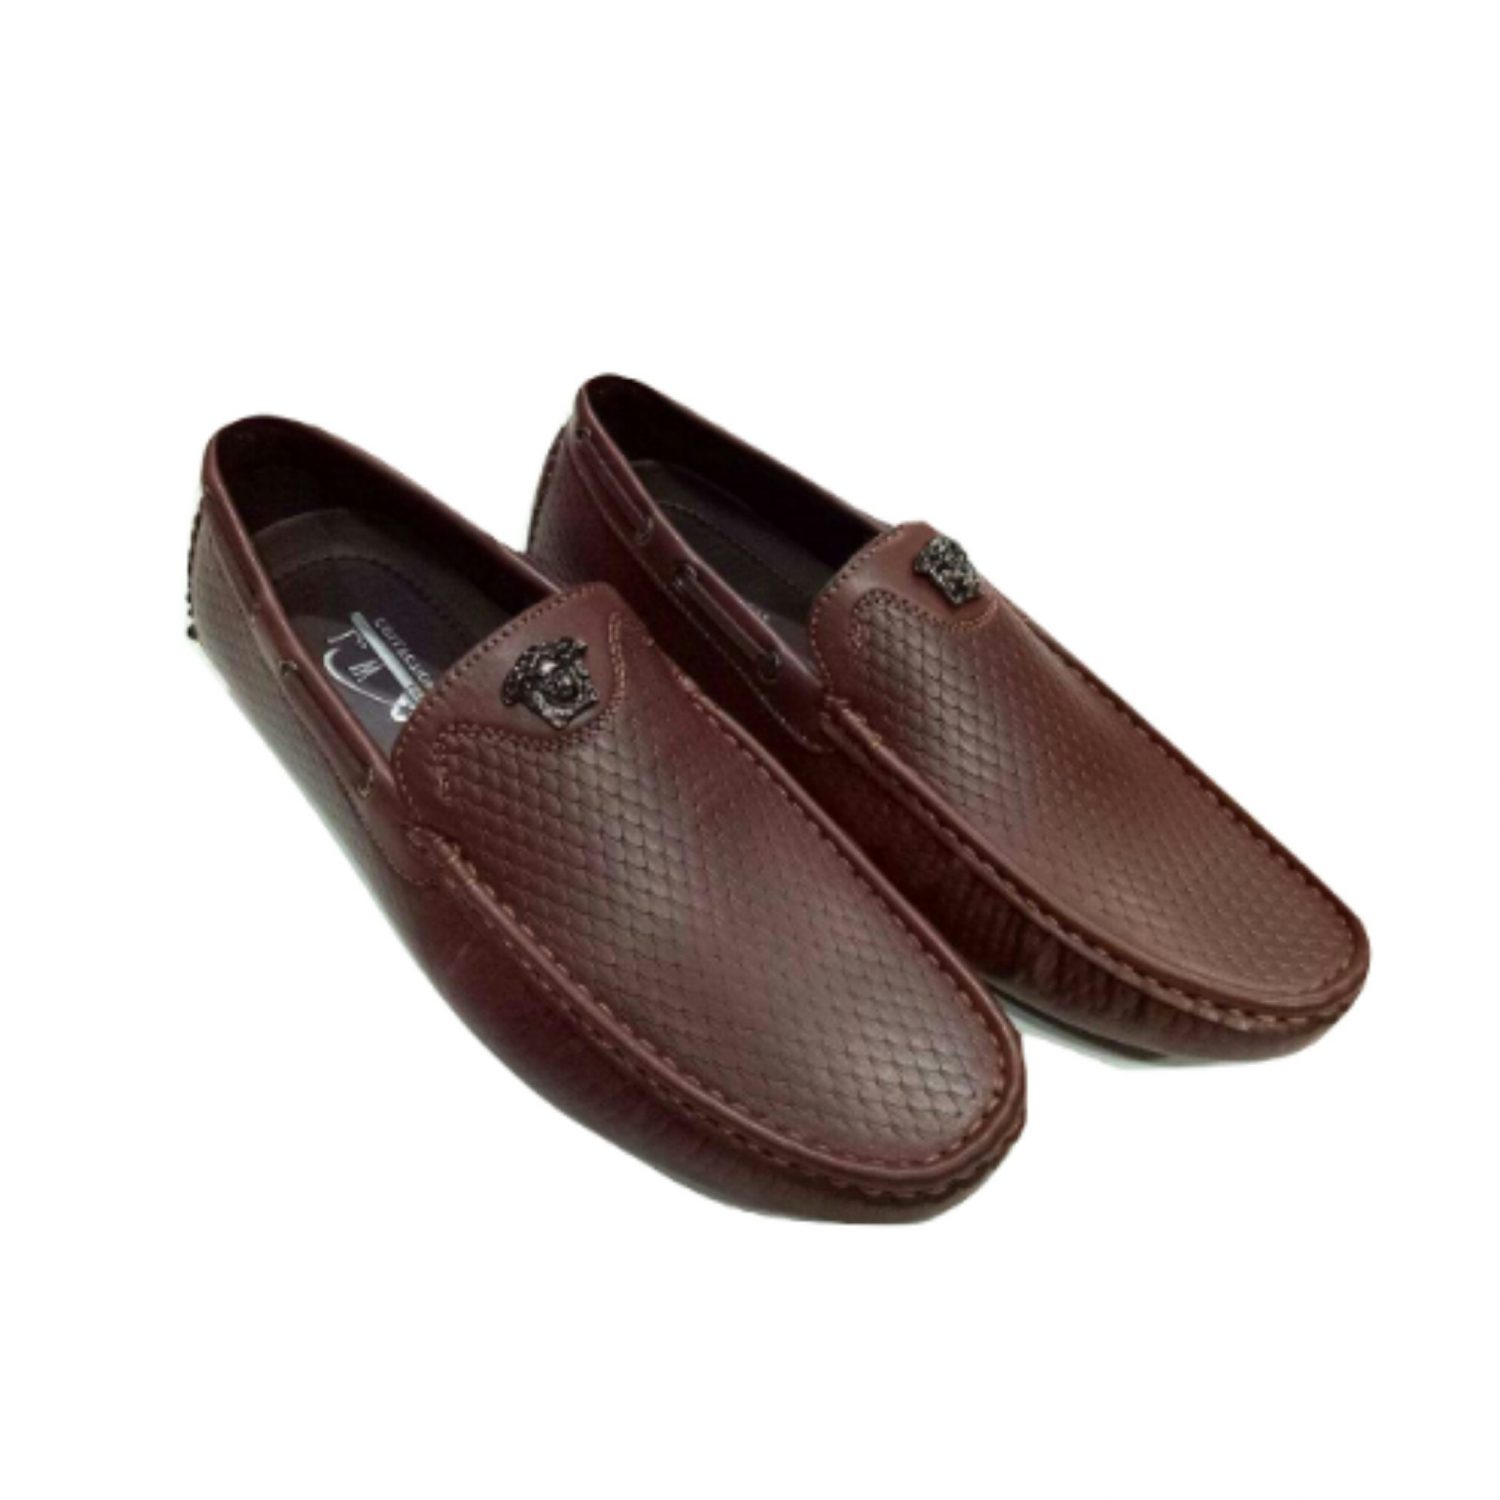 Mens brown loafers prices in Pakistan | 20%Off - Loafer Shoes For Mens